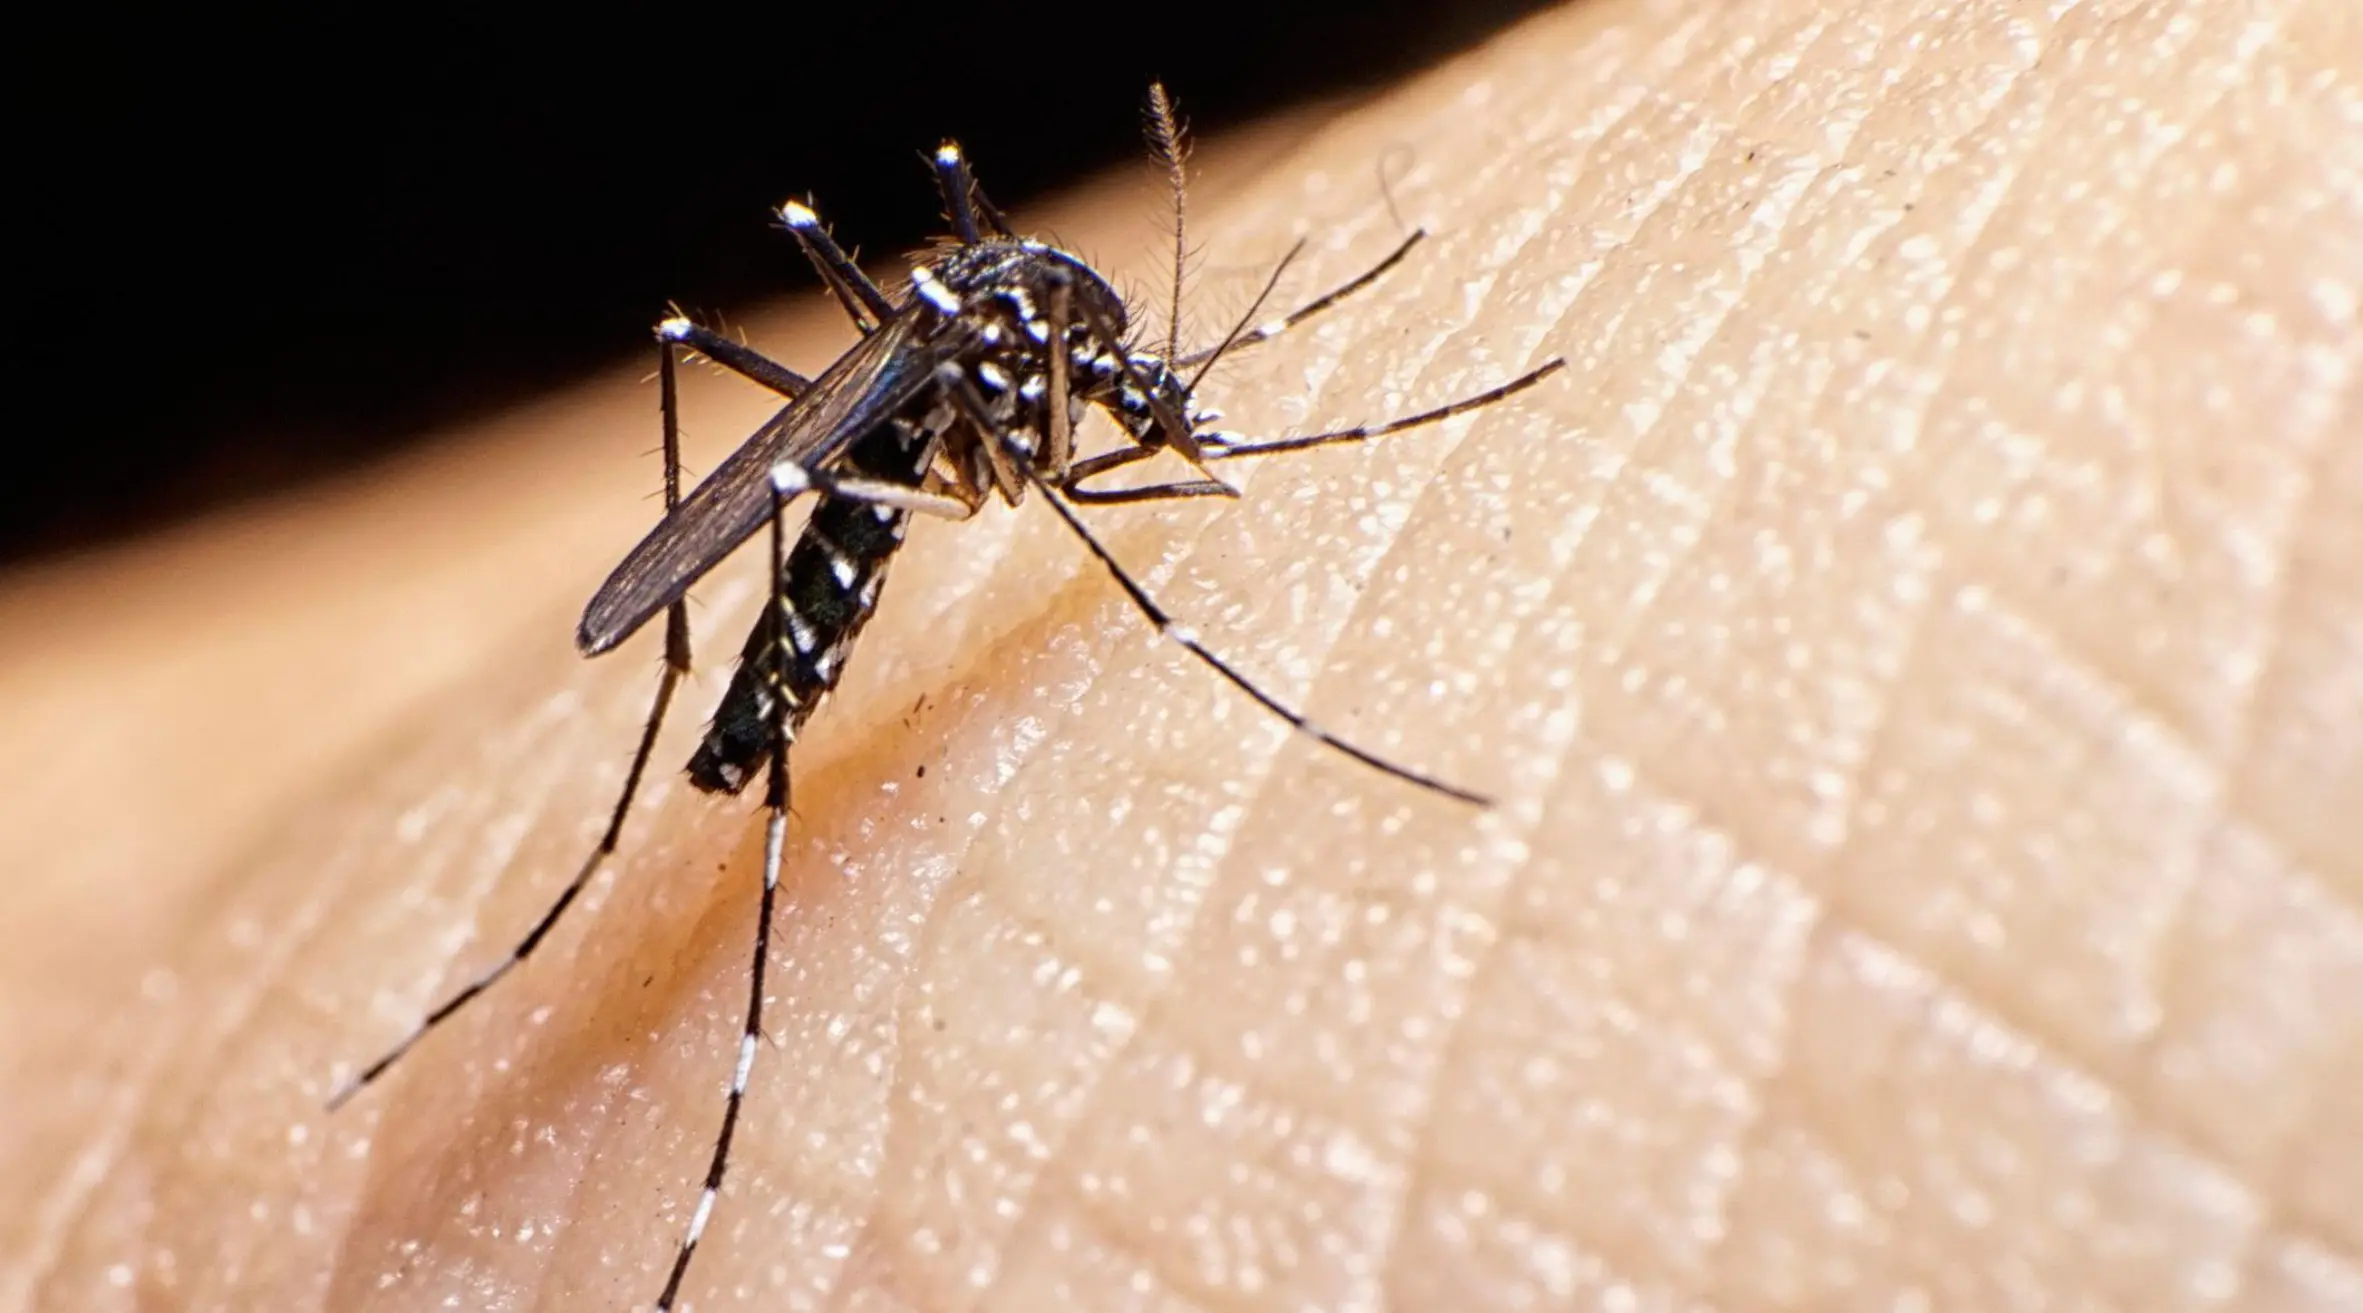 Tiger mosquitoes found in new Belgian locations raise concerns